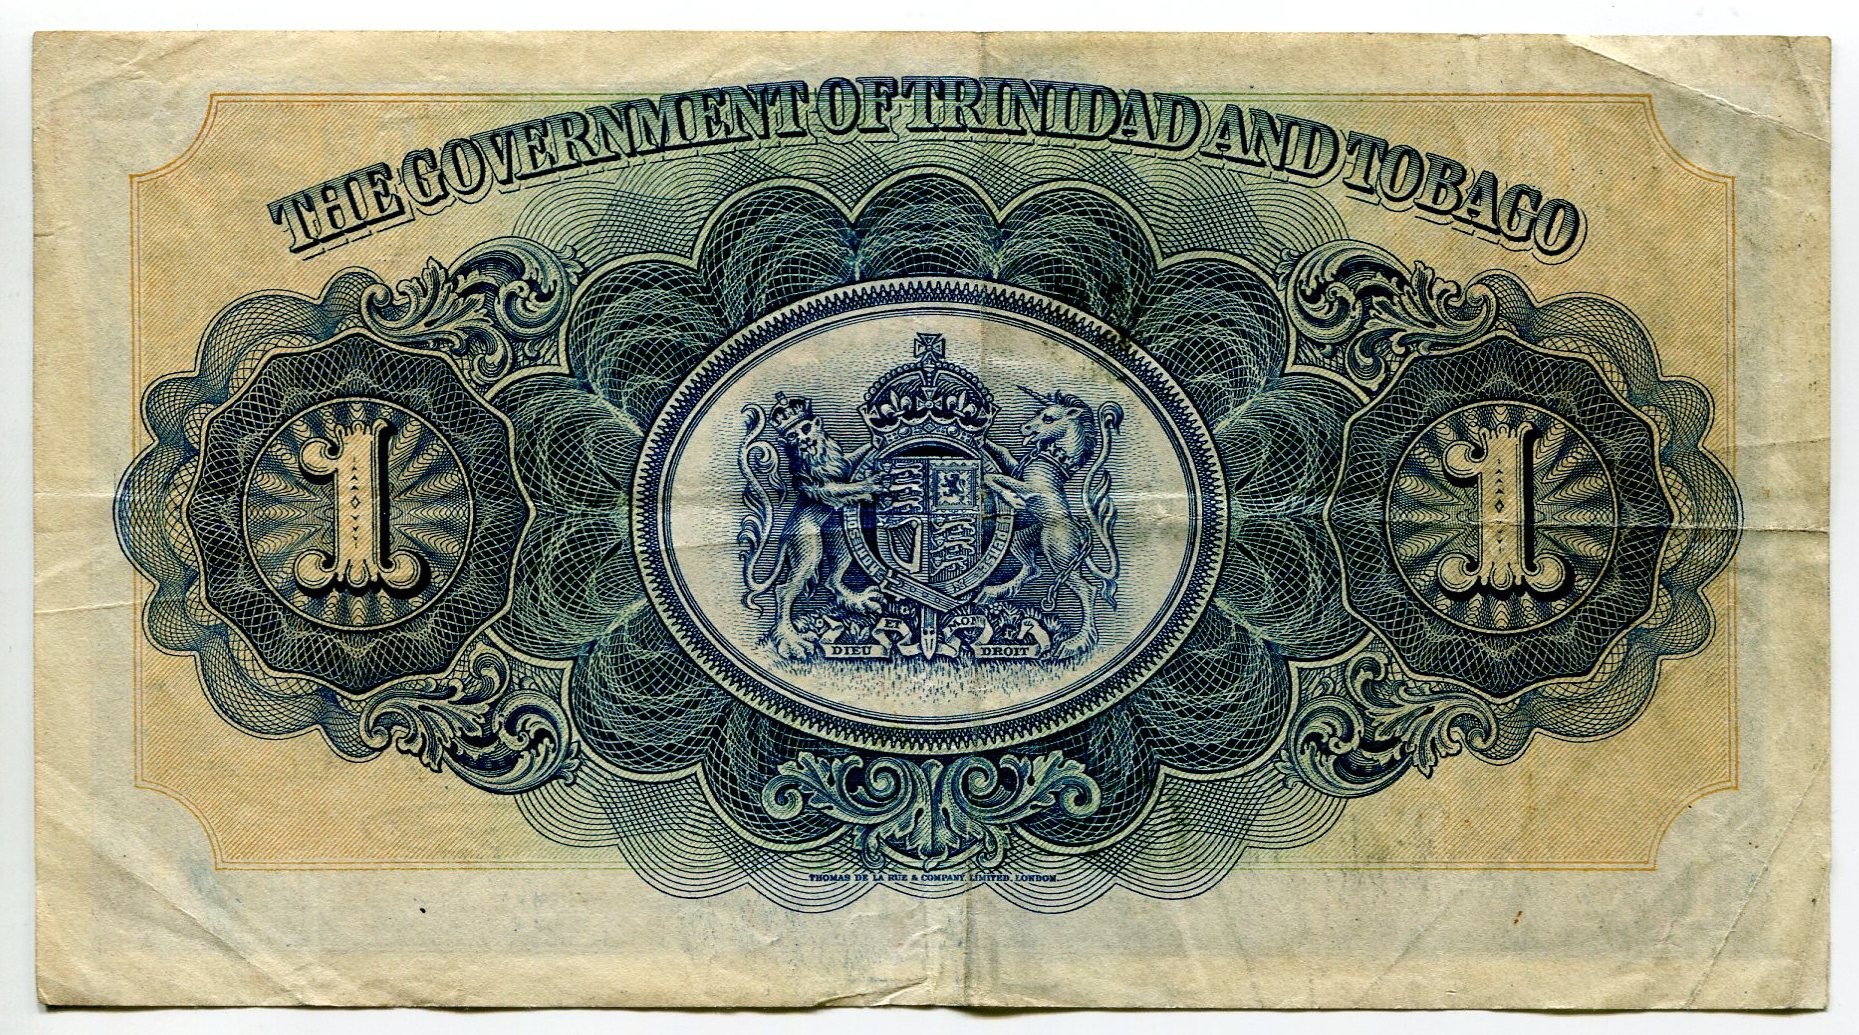 Trinidad and Tobago 1 Dollar - Foreign Currency